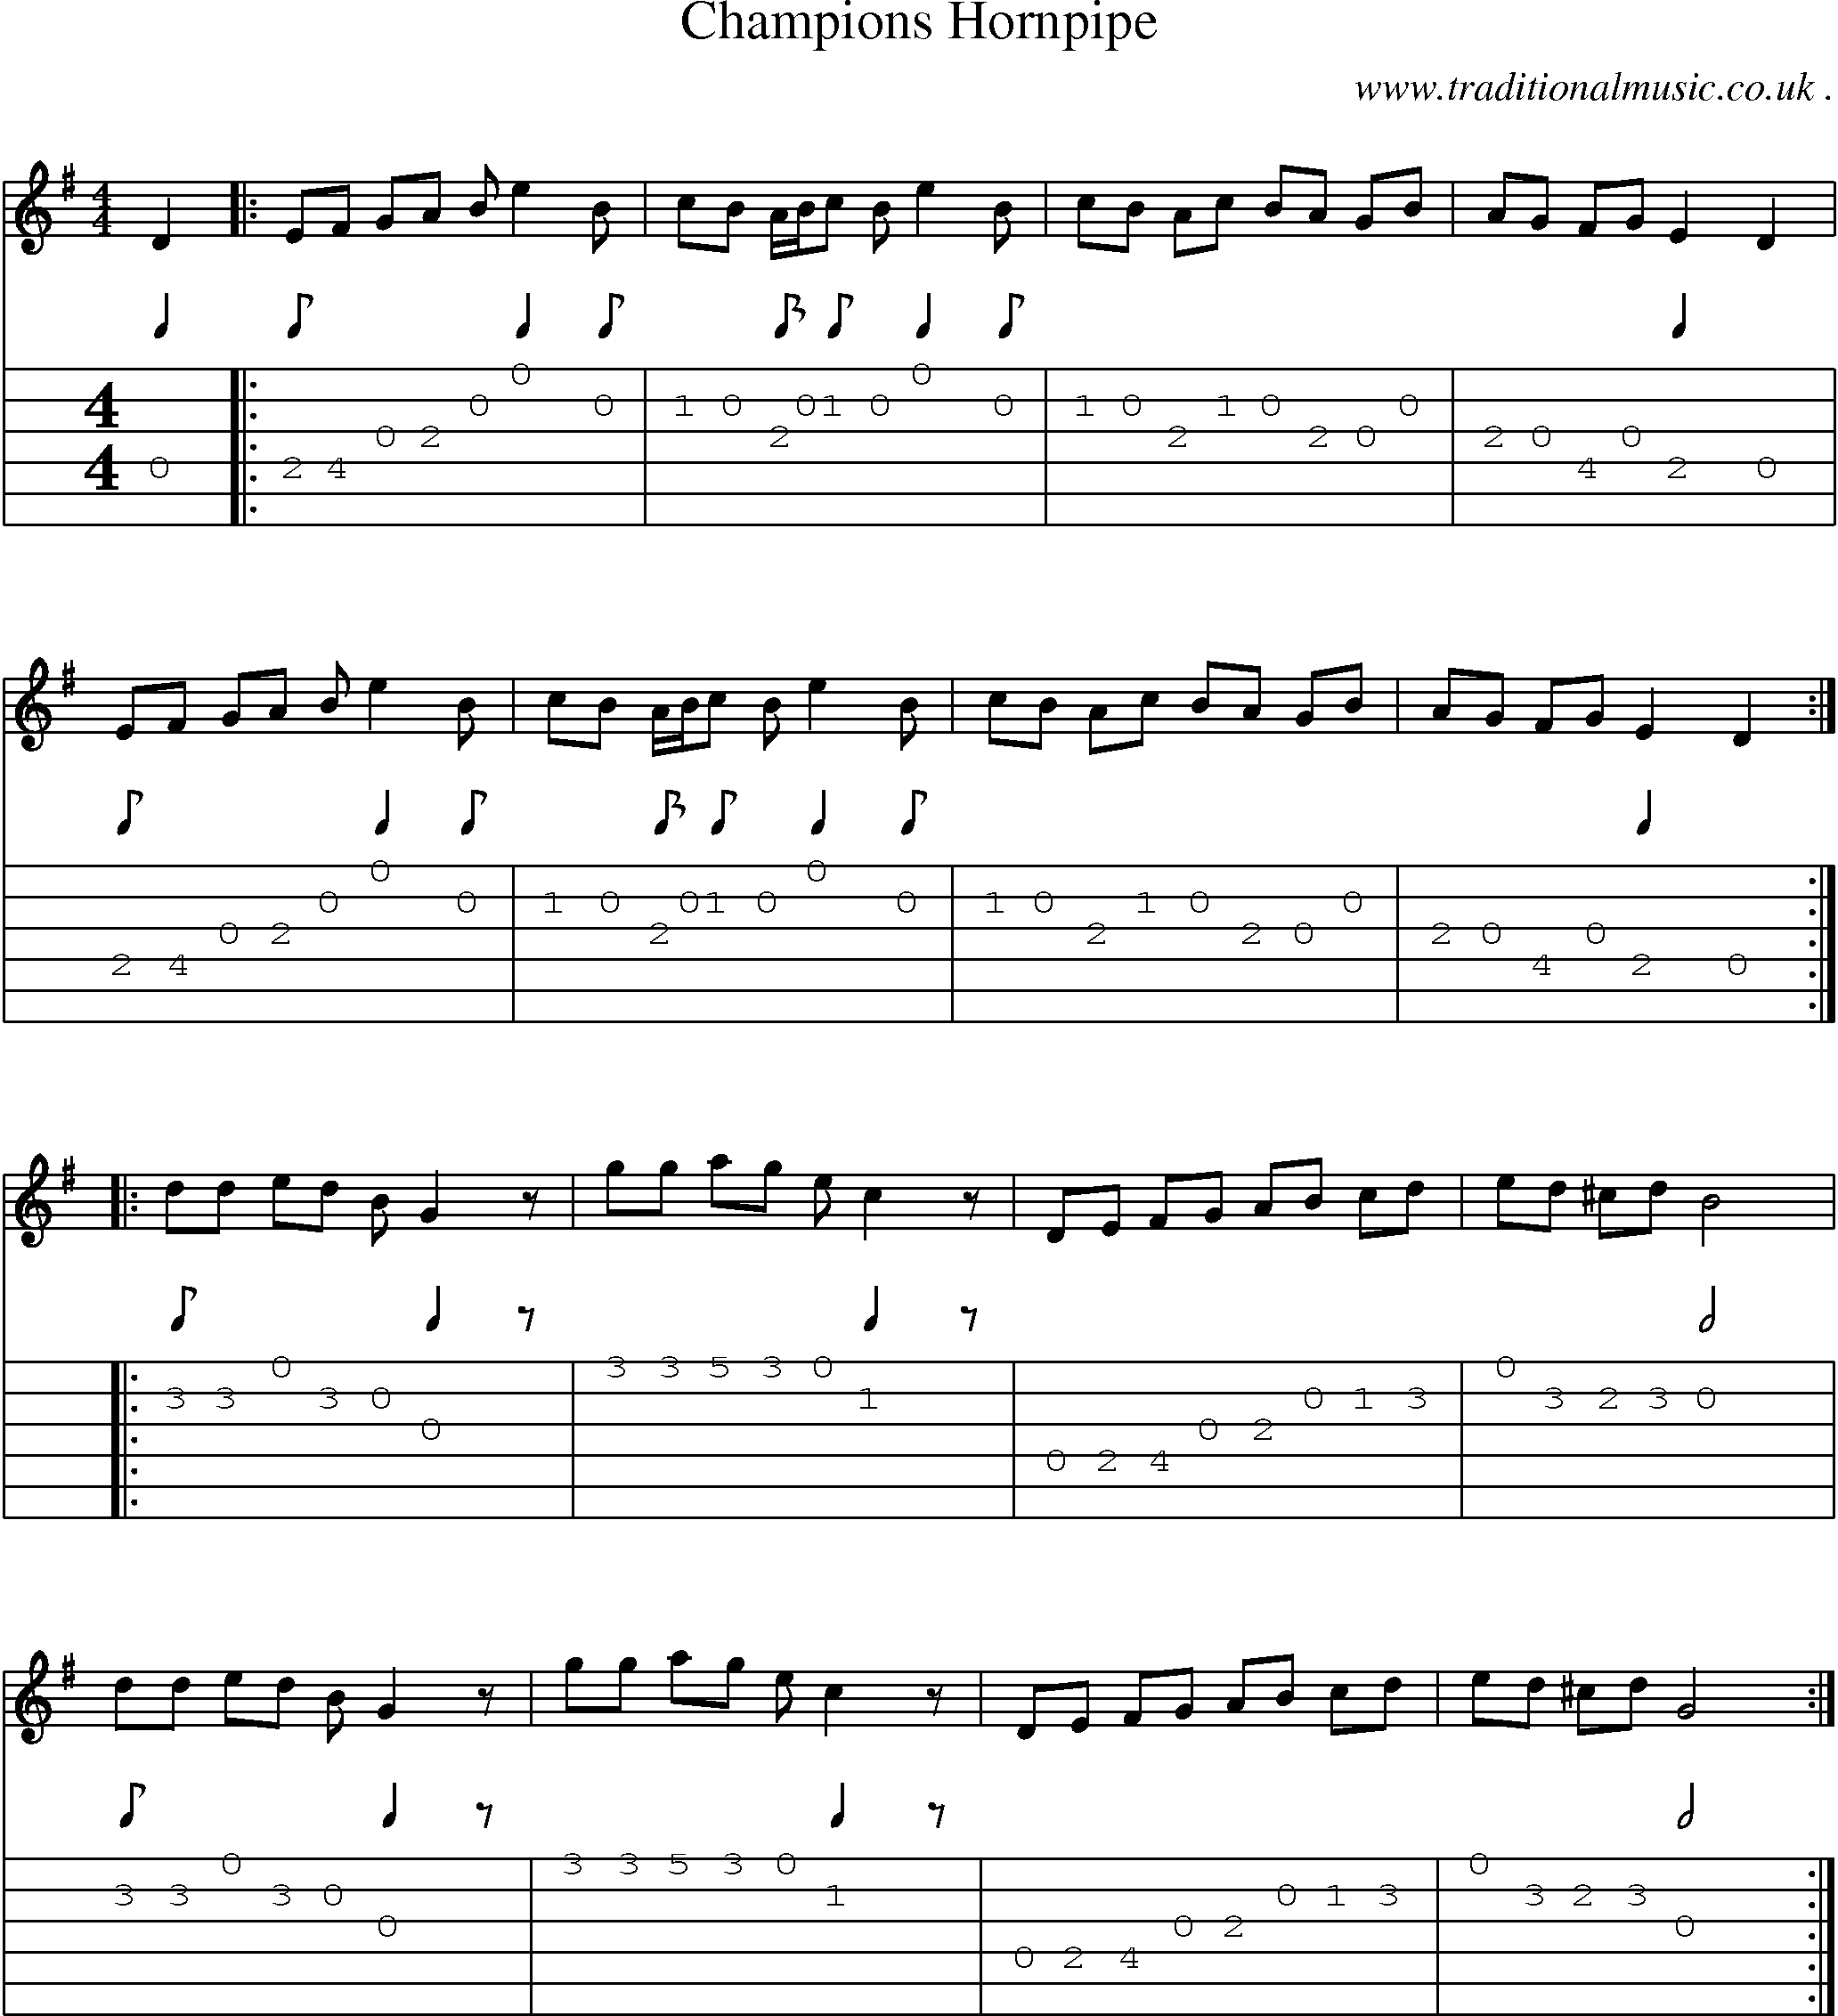 Sheet-Music and Guitar Tabs for Champions Hornpipe